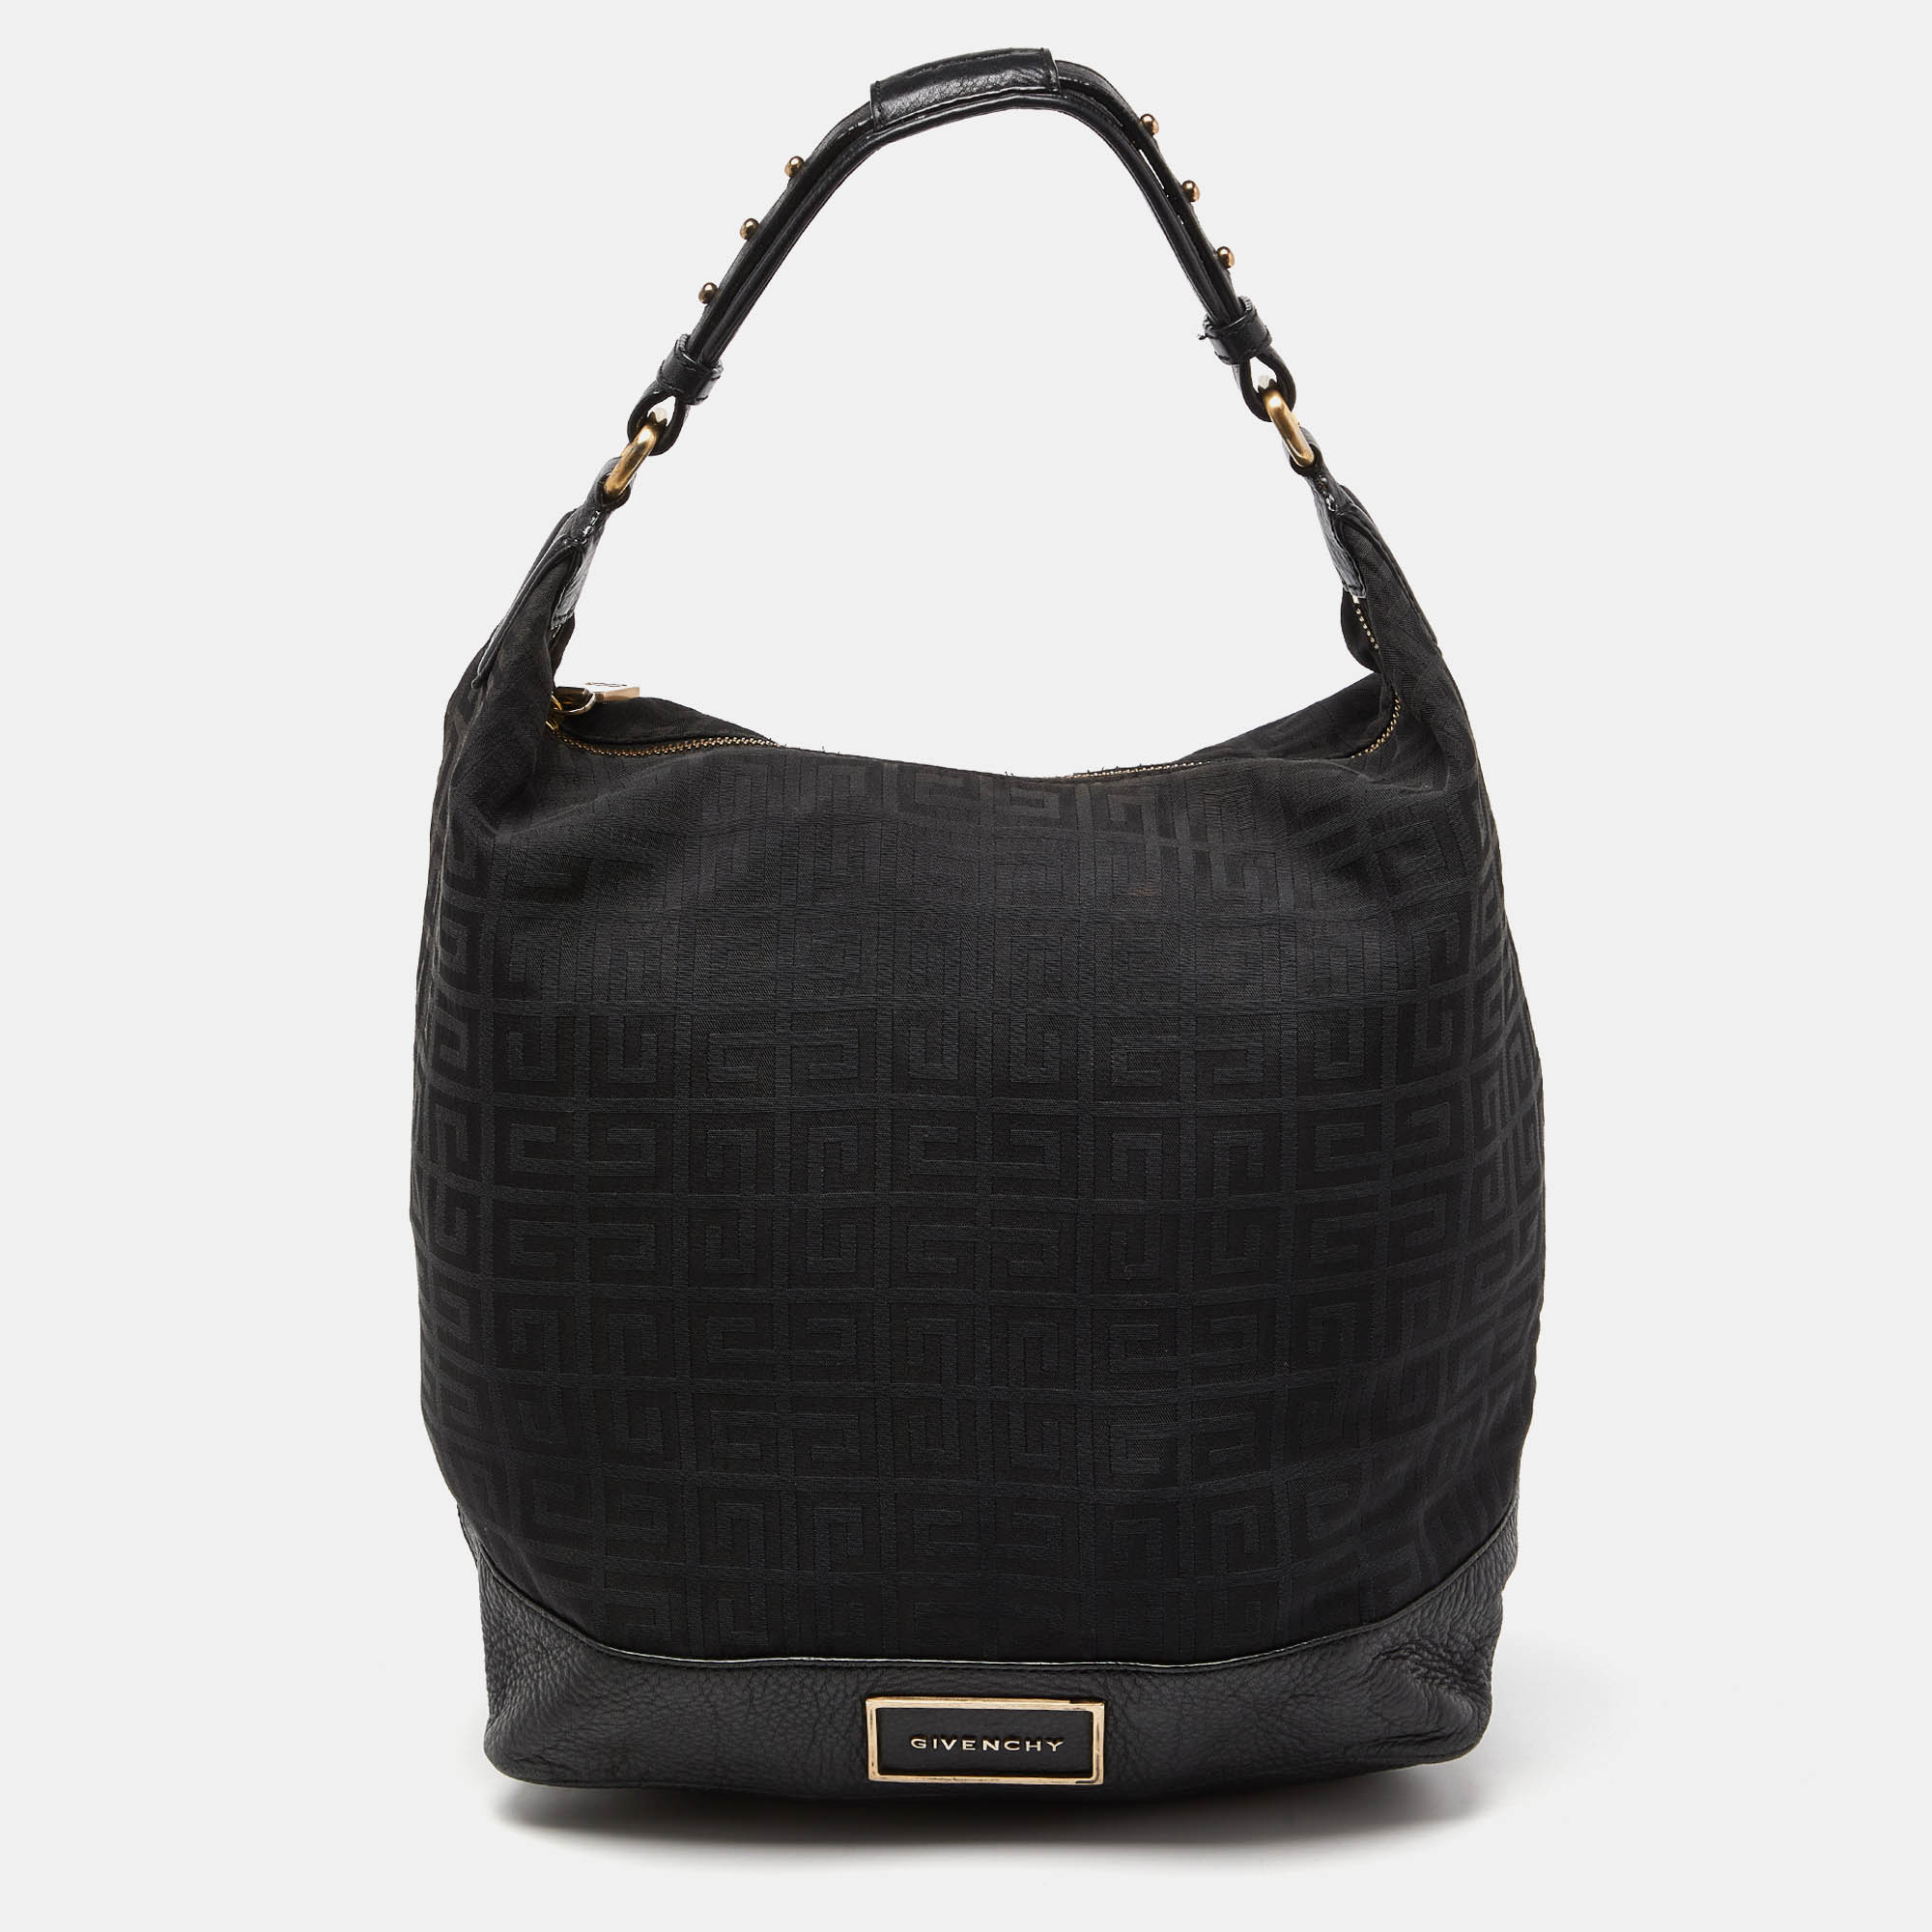 

Givenchy Black Monogram Canvas and Leather Bucket Hobo